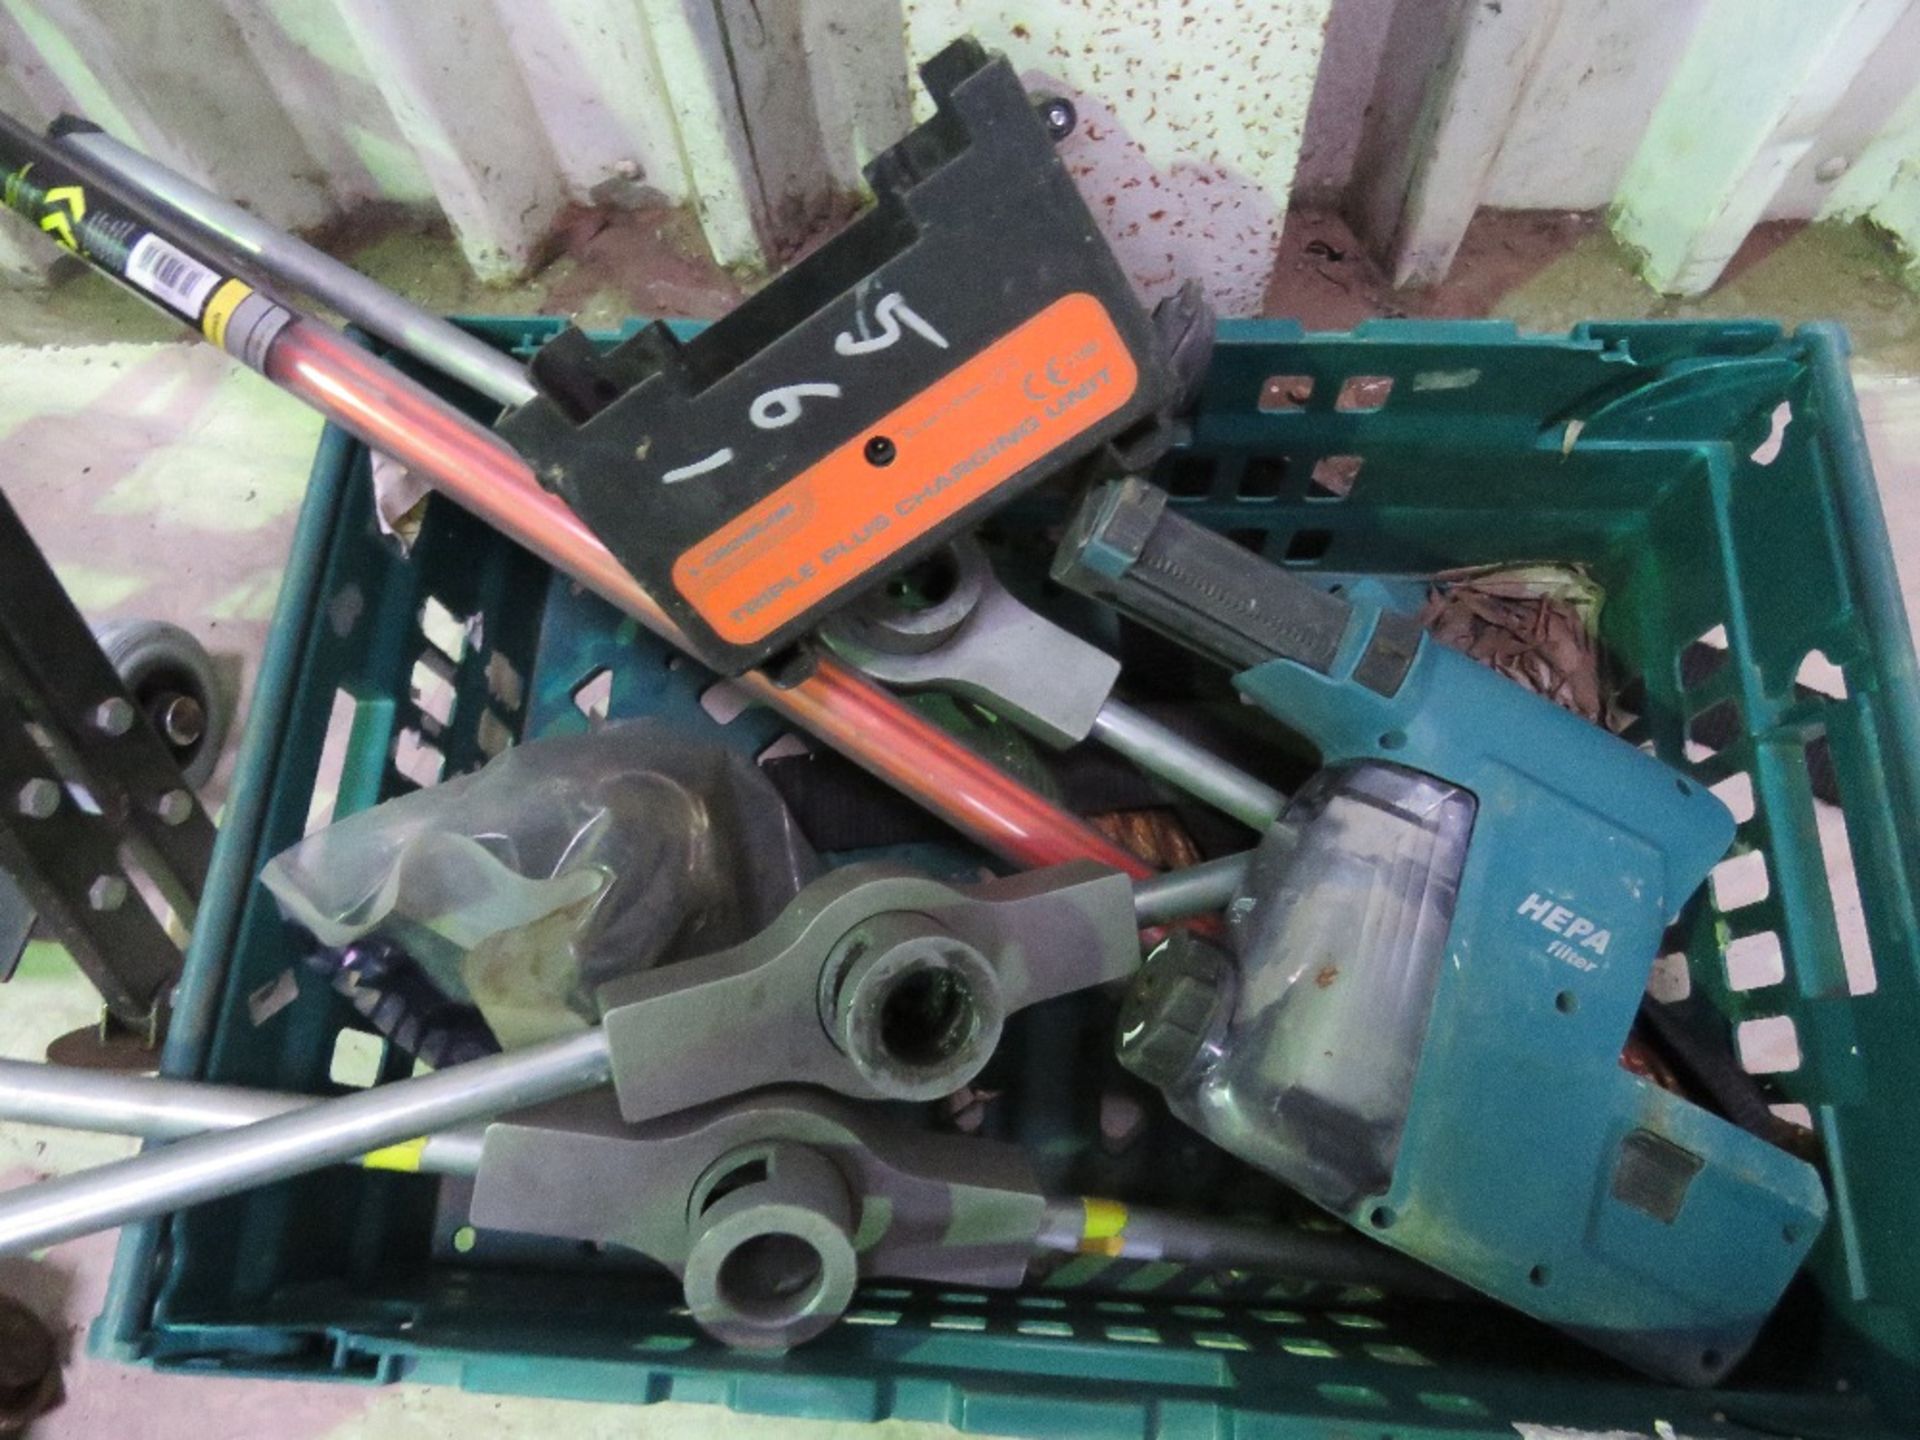 TOOL BAG CONTAINING DRILL BITS, DIE THREADING HOLDERS, ELECTRICIANS CABLE RODS ETC. SOURCED FROM COM - Image 2 of 6